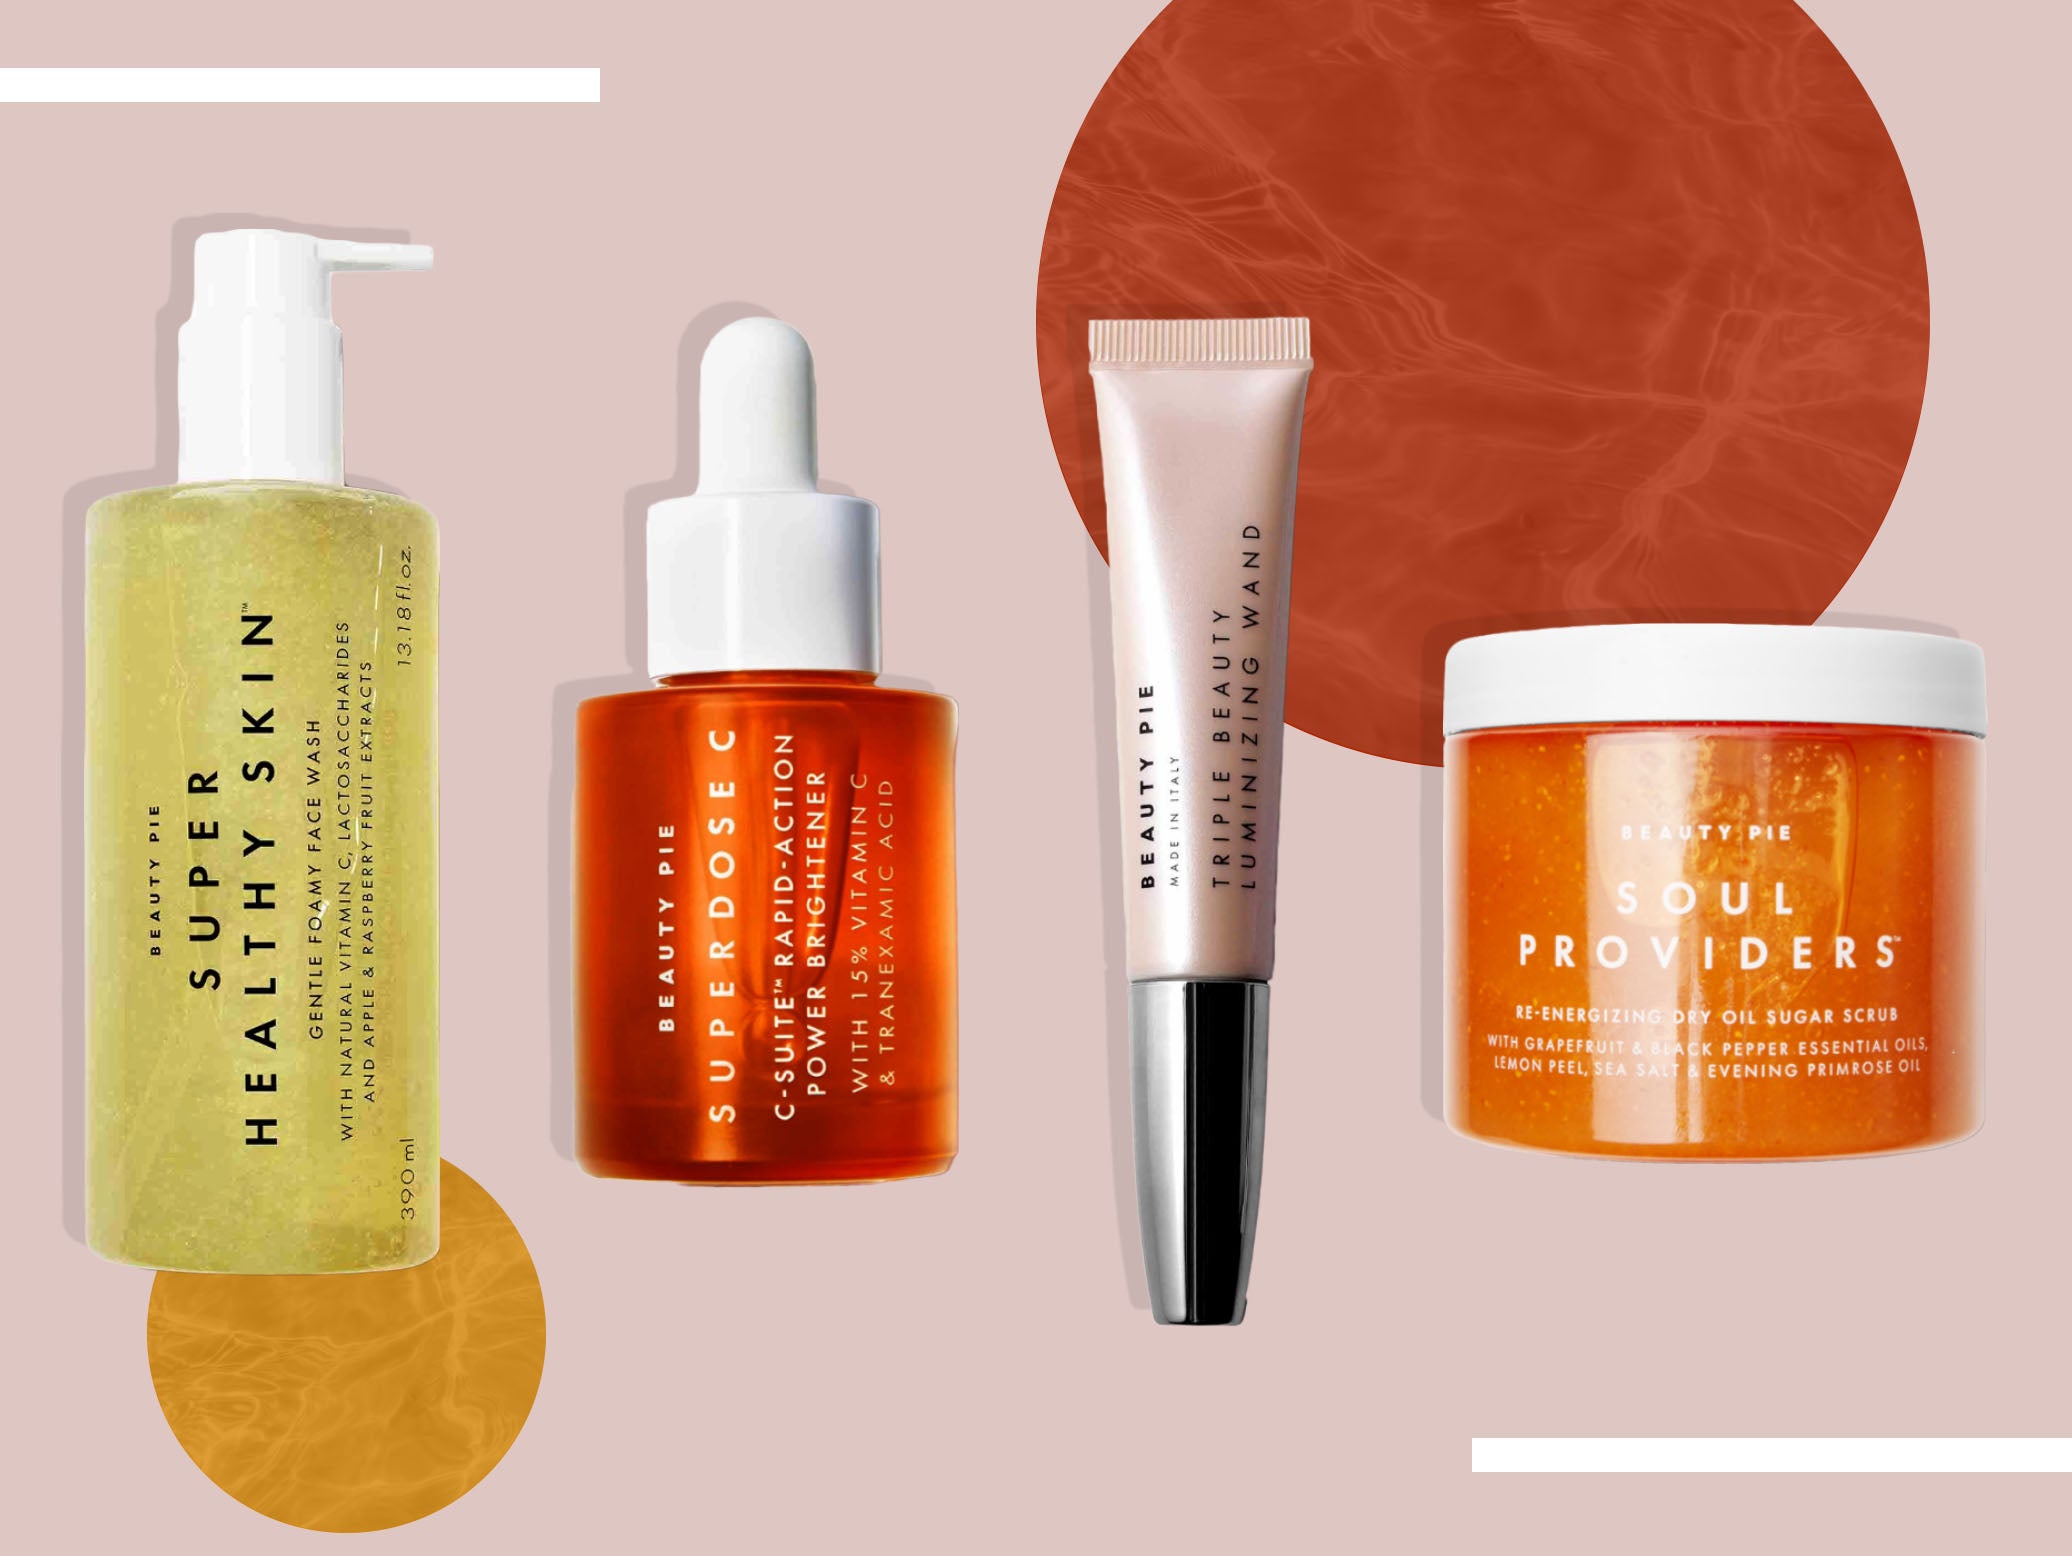 From candles to skincare, there’s no such thing as a dud Beauty Pie product in our eyes